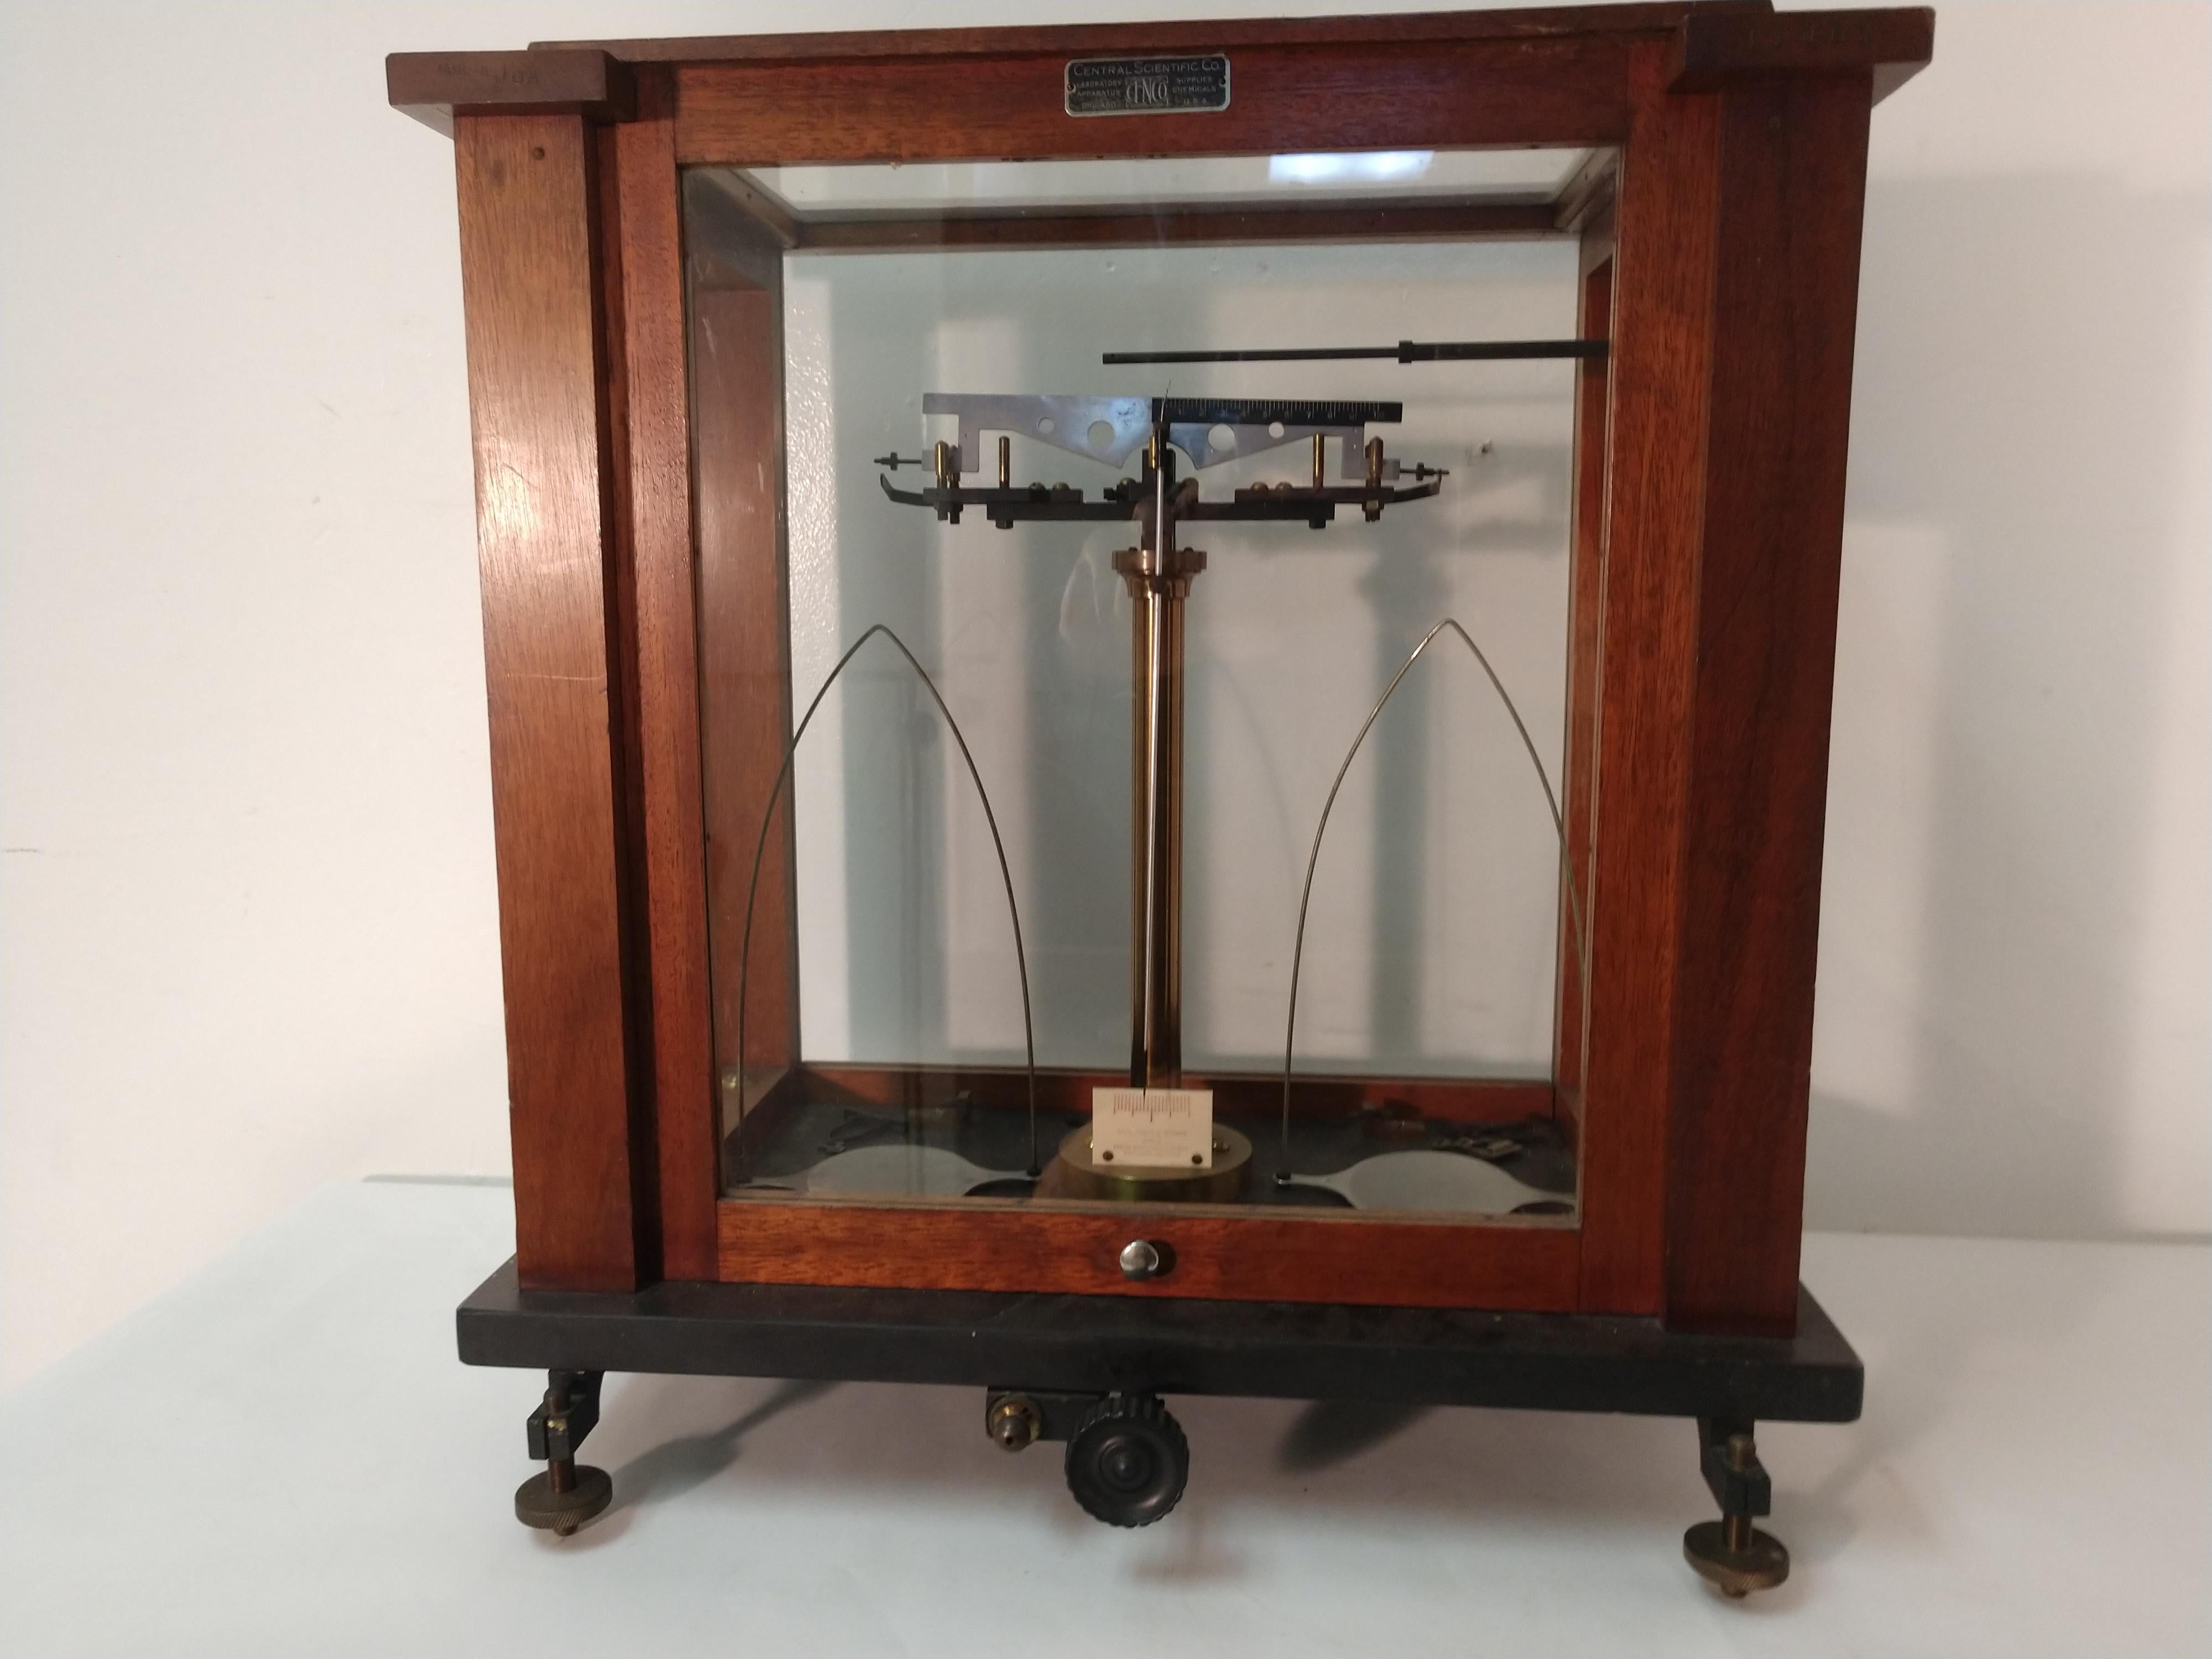 Fabulous early 20th century Pharmaceutical and minerals scale.In excellent vintage condition. Walnut and glass with a slate base creates the housing for the scale. Very cool decorative piece, door glides upward with ease.